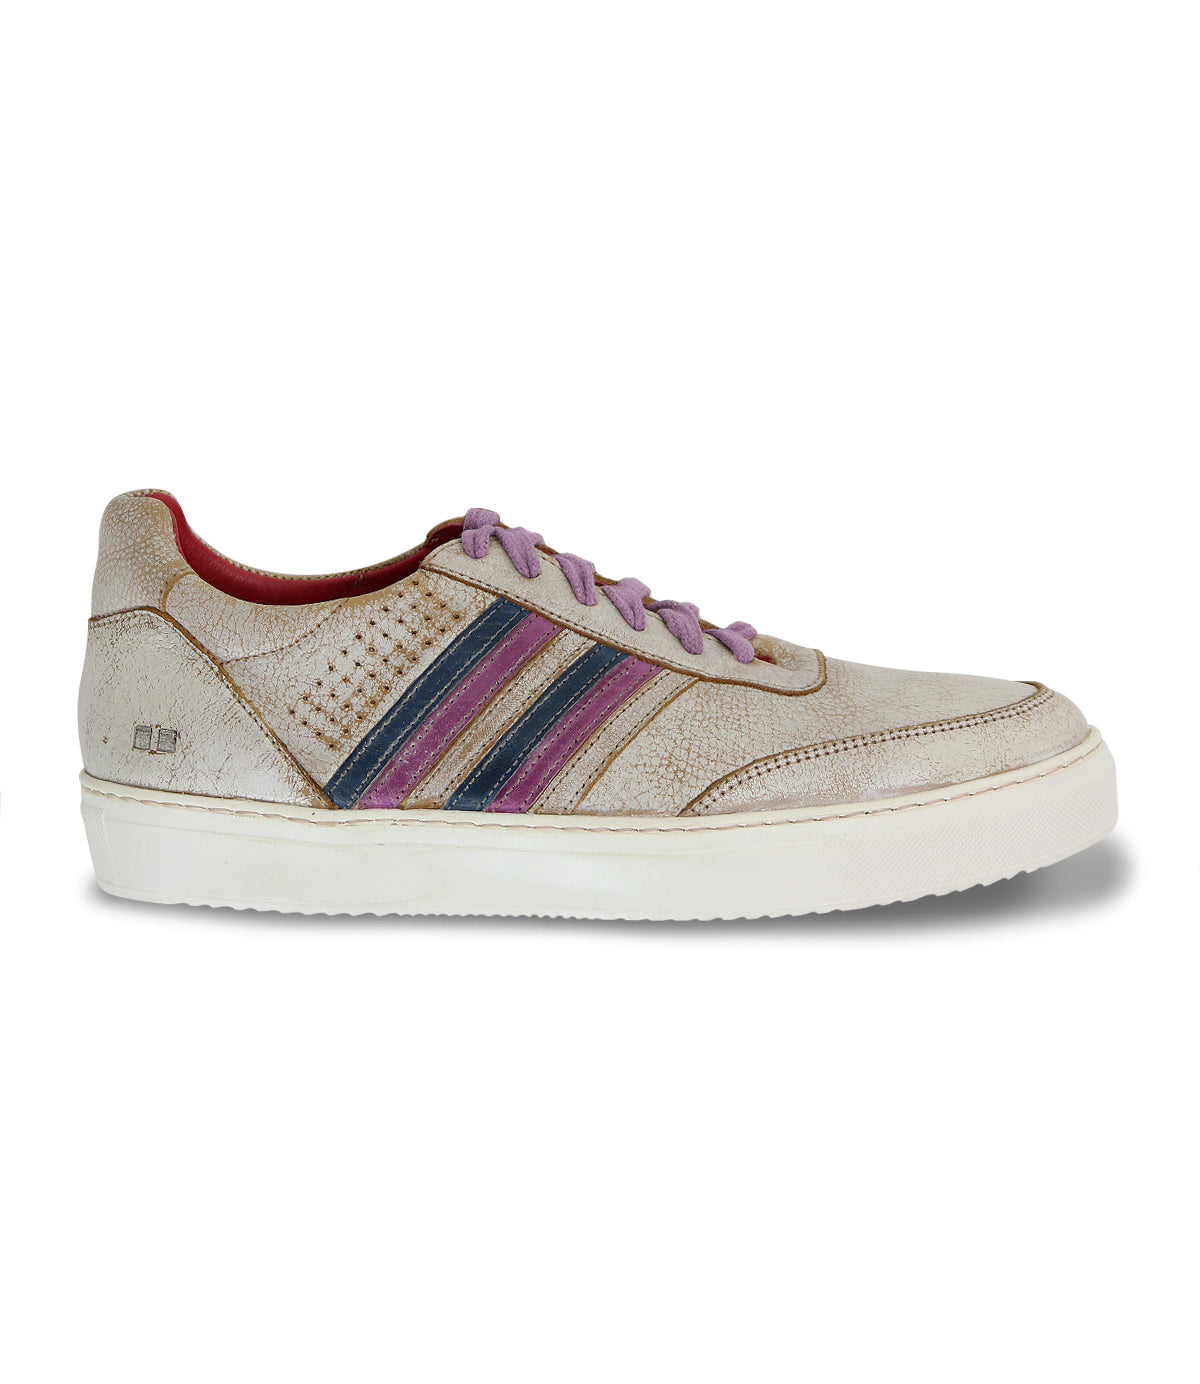 A pair of Bed Stu Carrington men's sneakers with a colorful stripe on the side.